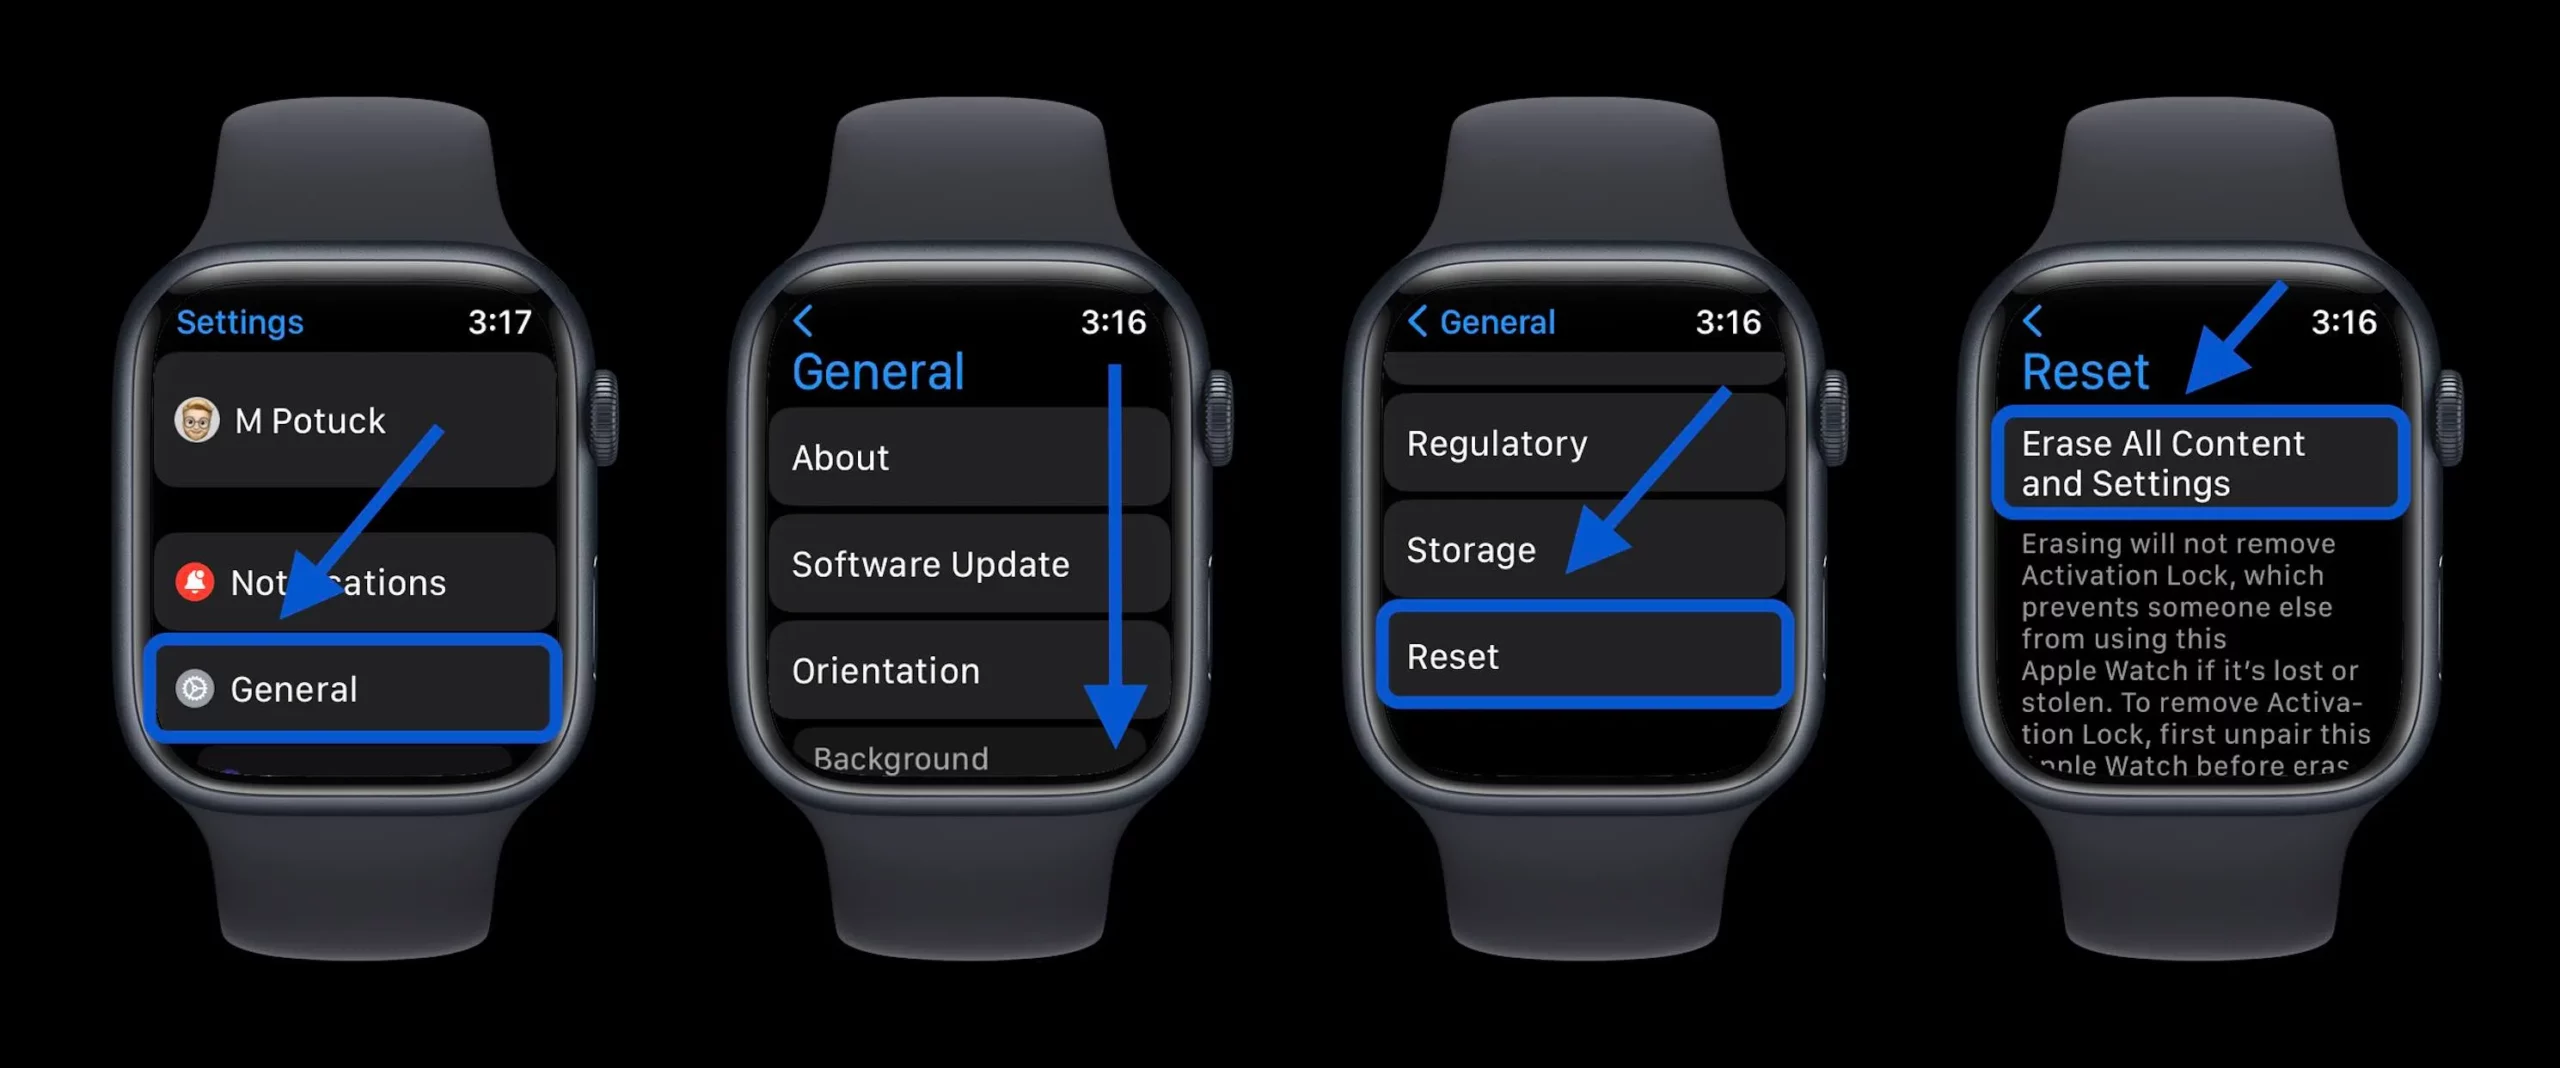 how to reset apple watch